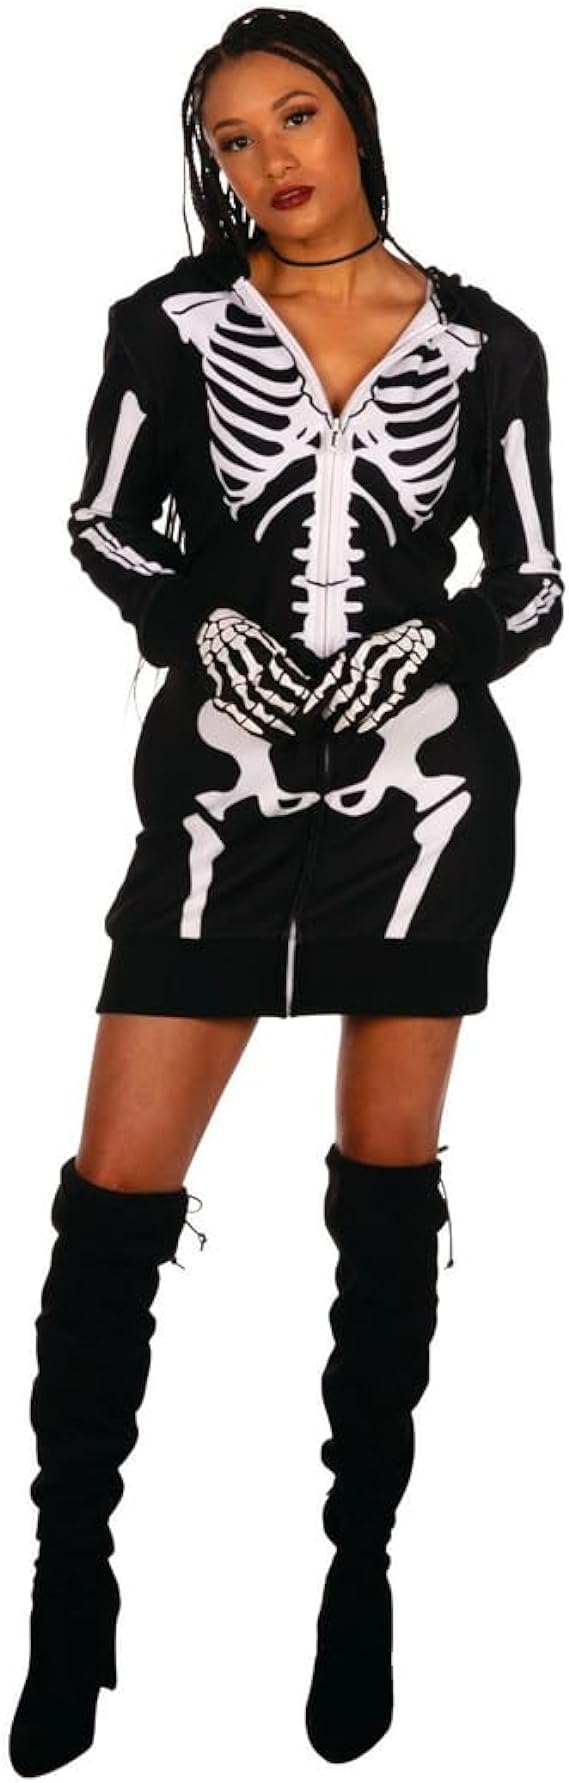 Tipsy Elves’ Women's Skeleton Costume Dress - Cute Spooky Black and White Halloween Outfit